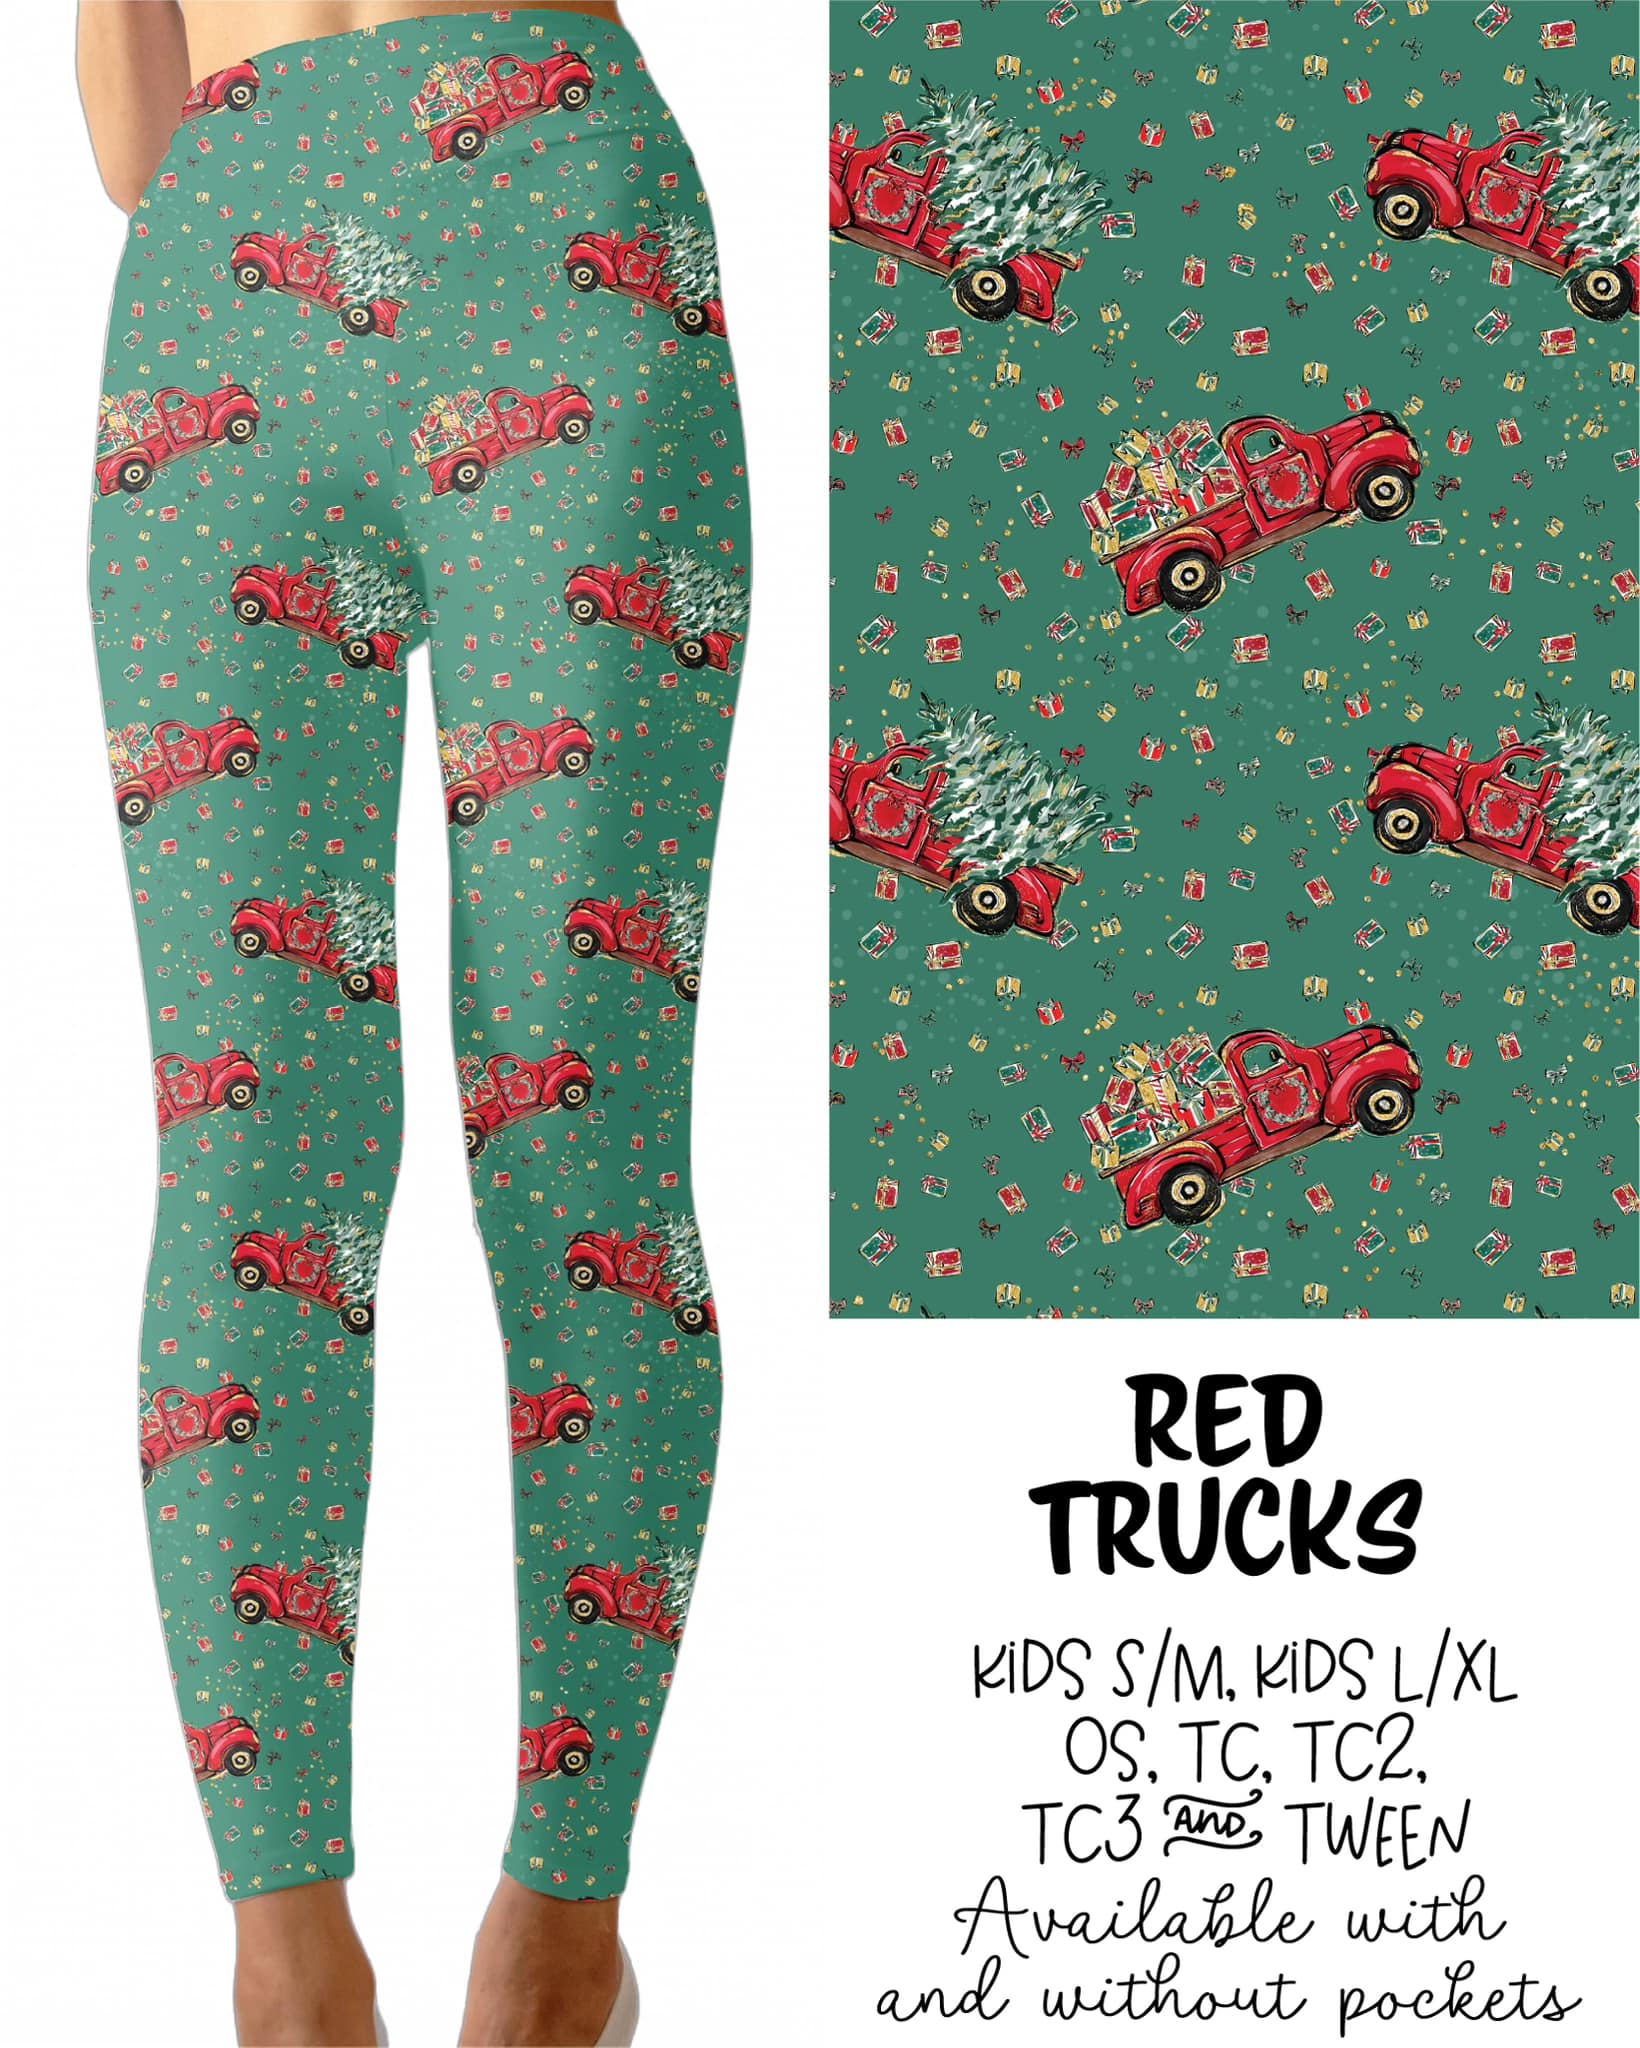 Red Trucks Leggings Full Length With and Without Pockets Preorder 0927